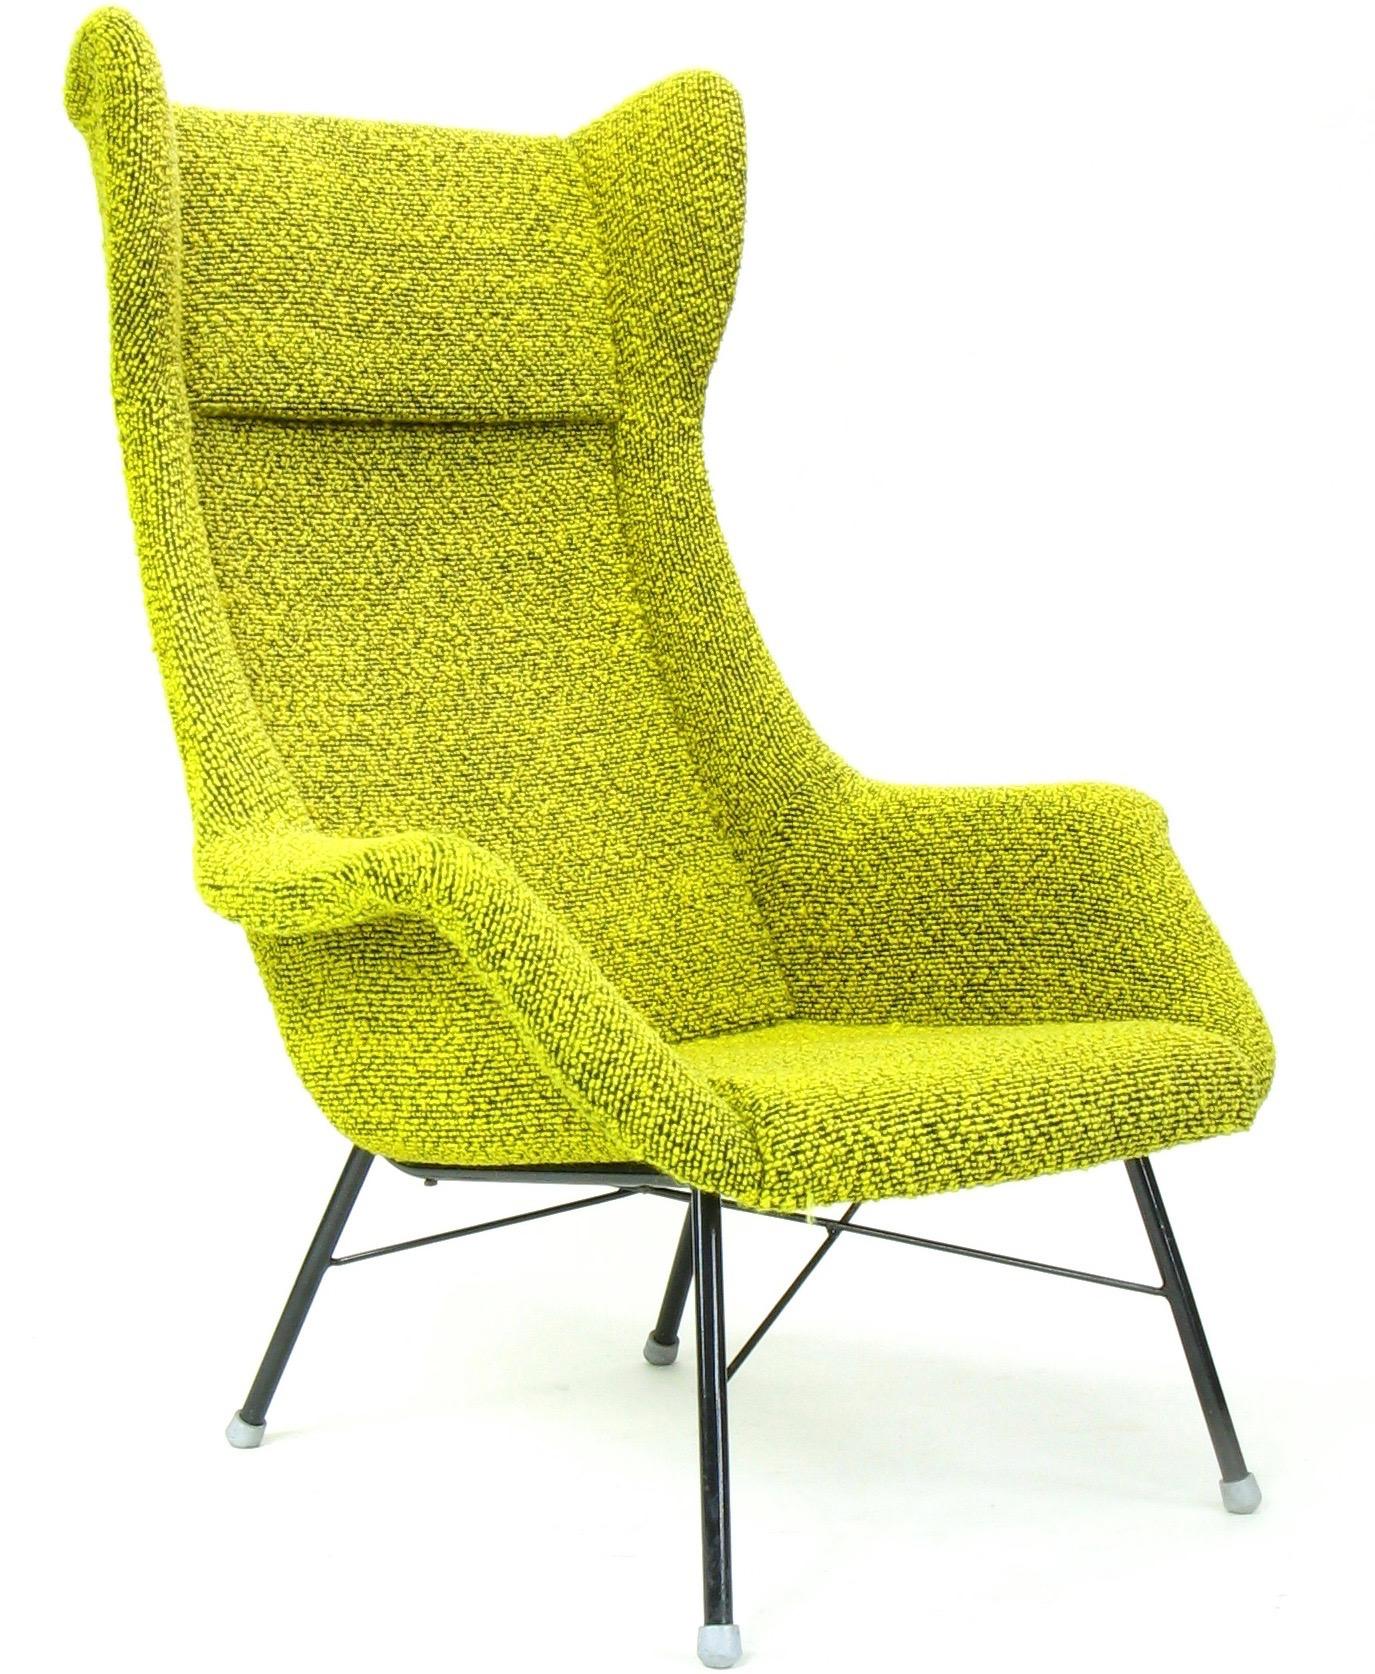 Absolutely unique Wingback armchair designed by Miroslav Navratil.
Produced by TON in Bystrice in the 1960s.
The original yellow/green material (sheep's wool boucle) was cleaned and is in excellent condition. 
